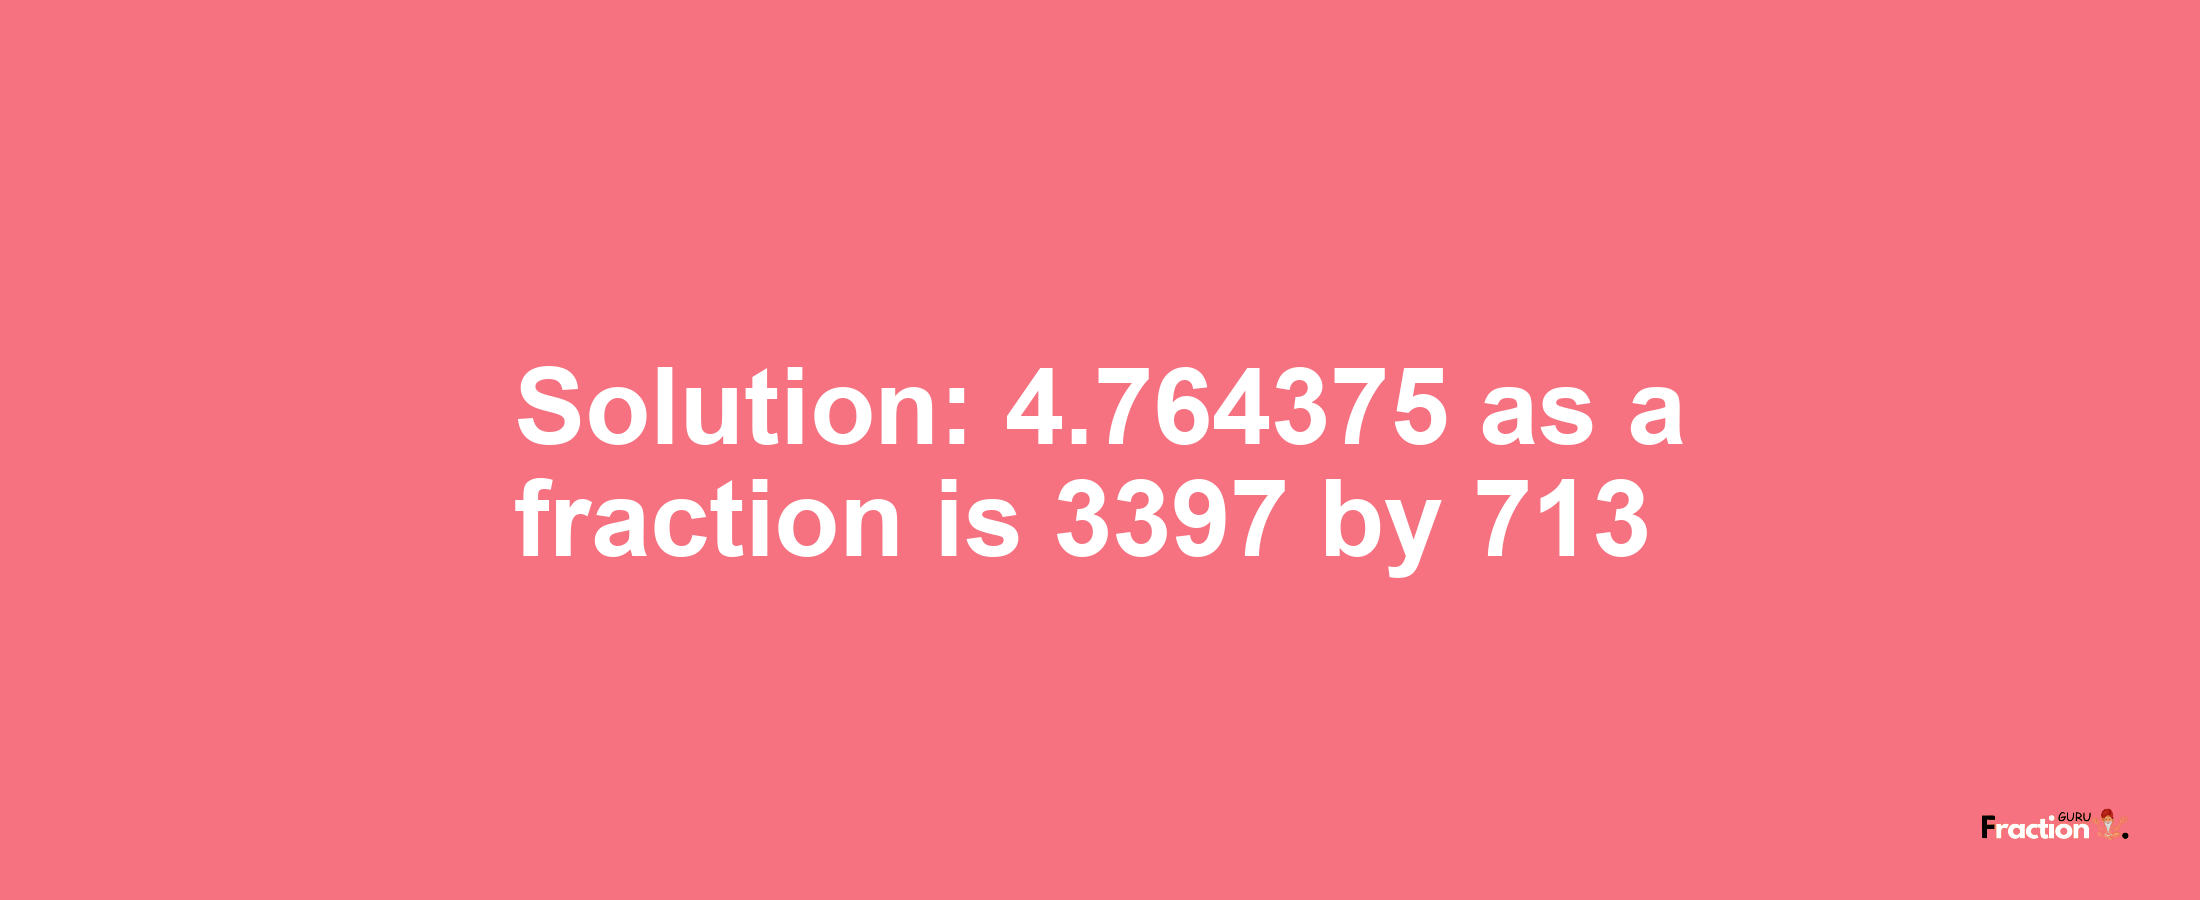 Solution:4.764375 as a fraction is 3397/713